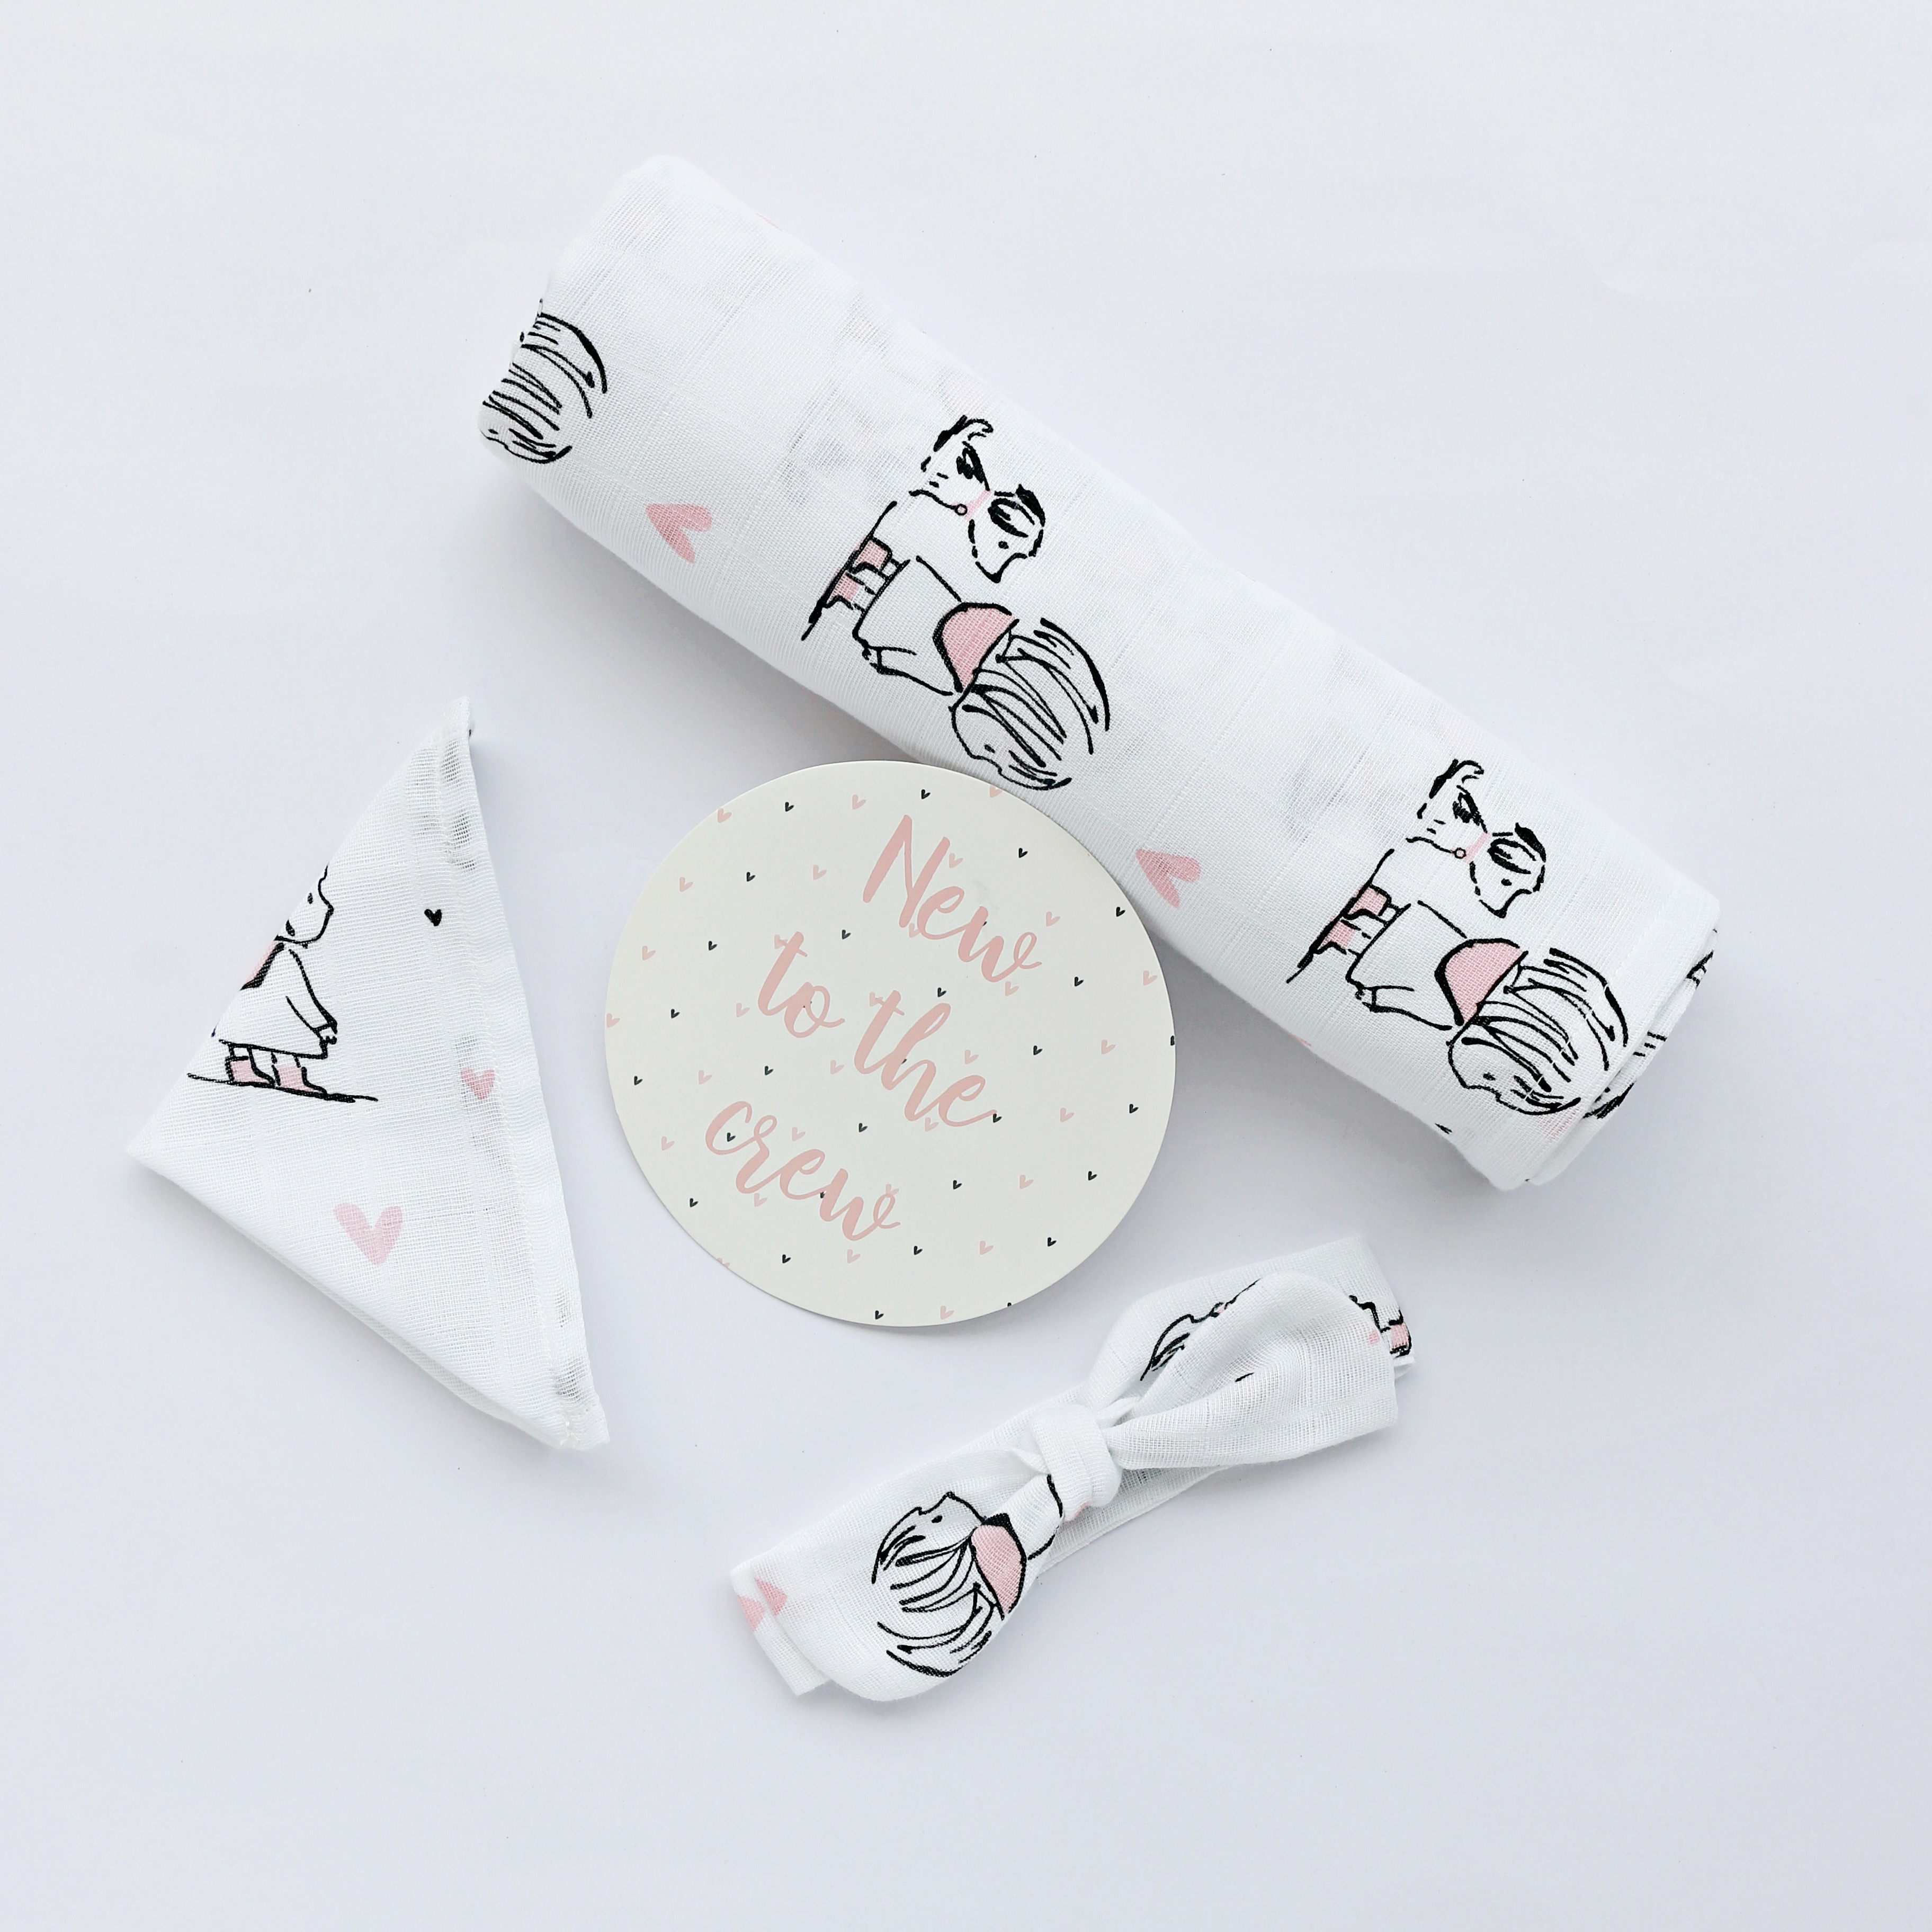 New to the Crew - Organic Cotton ( double layer ) Baby Muslin Swaddle/ Blanket - 110 X 110 cms